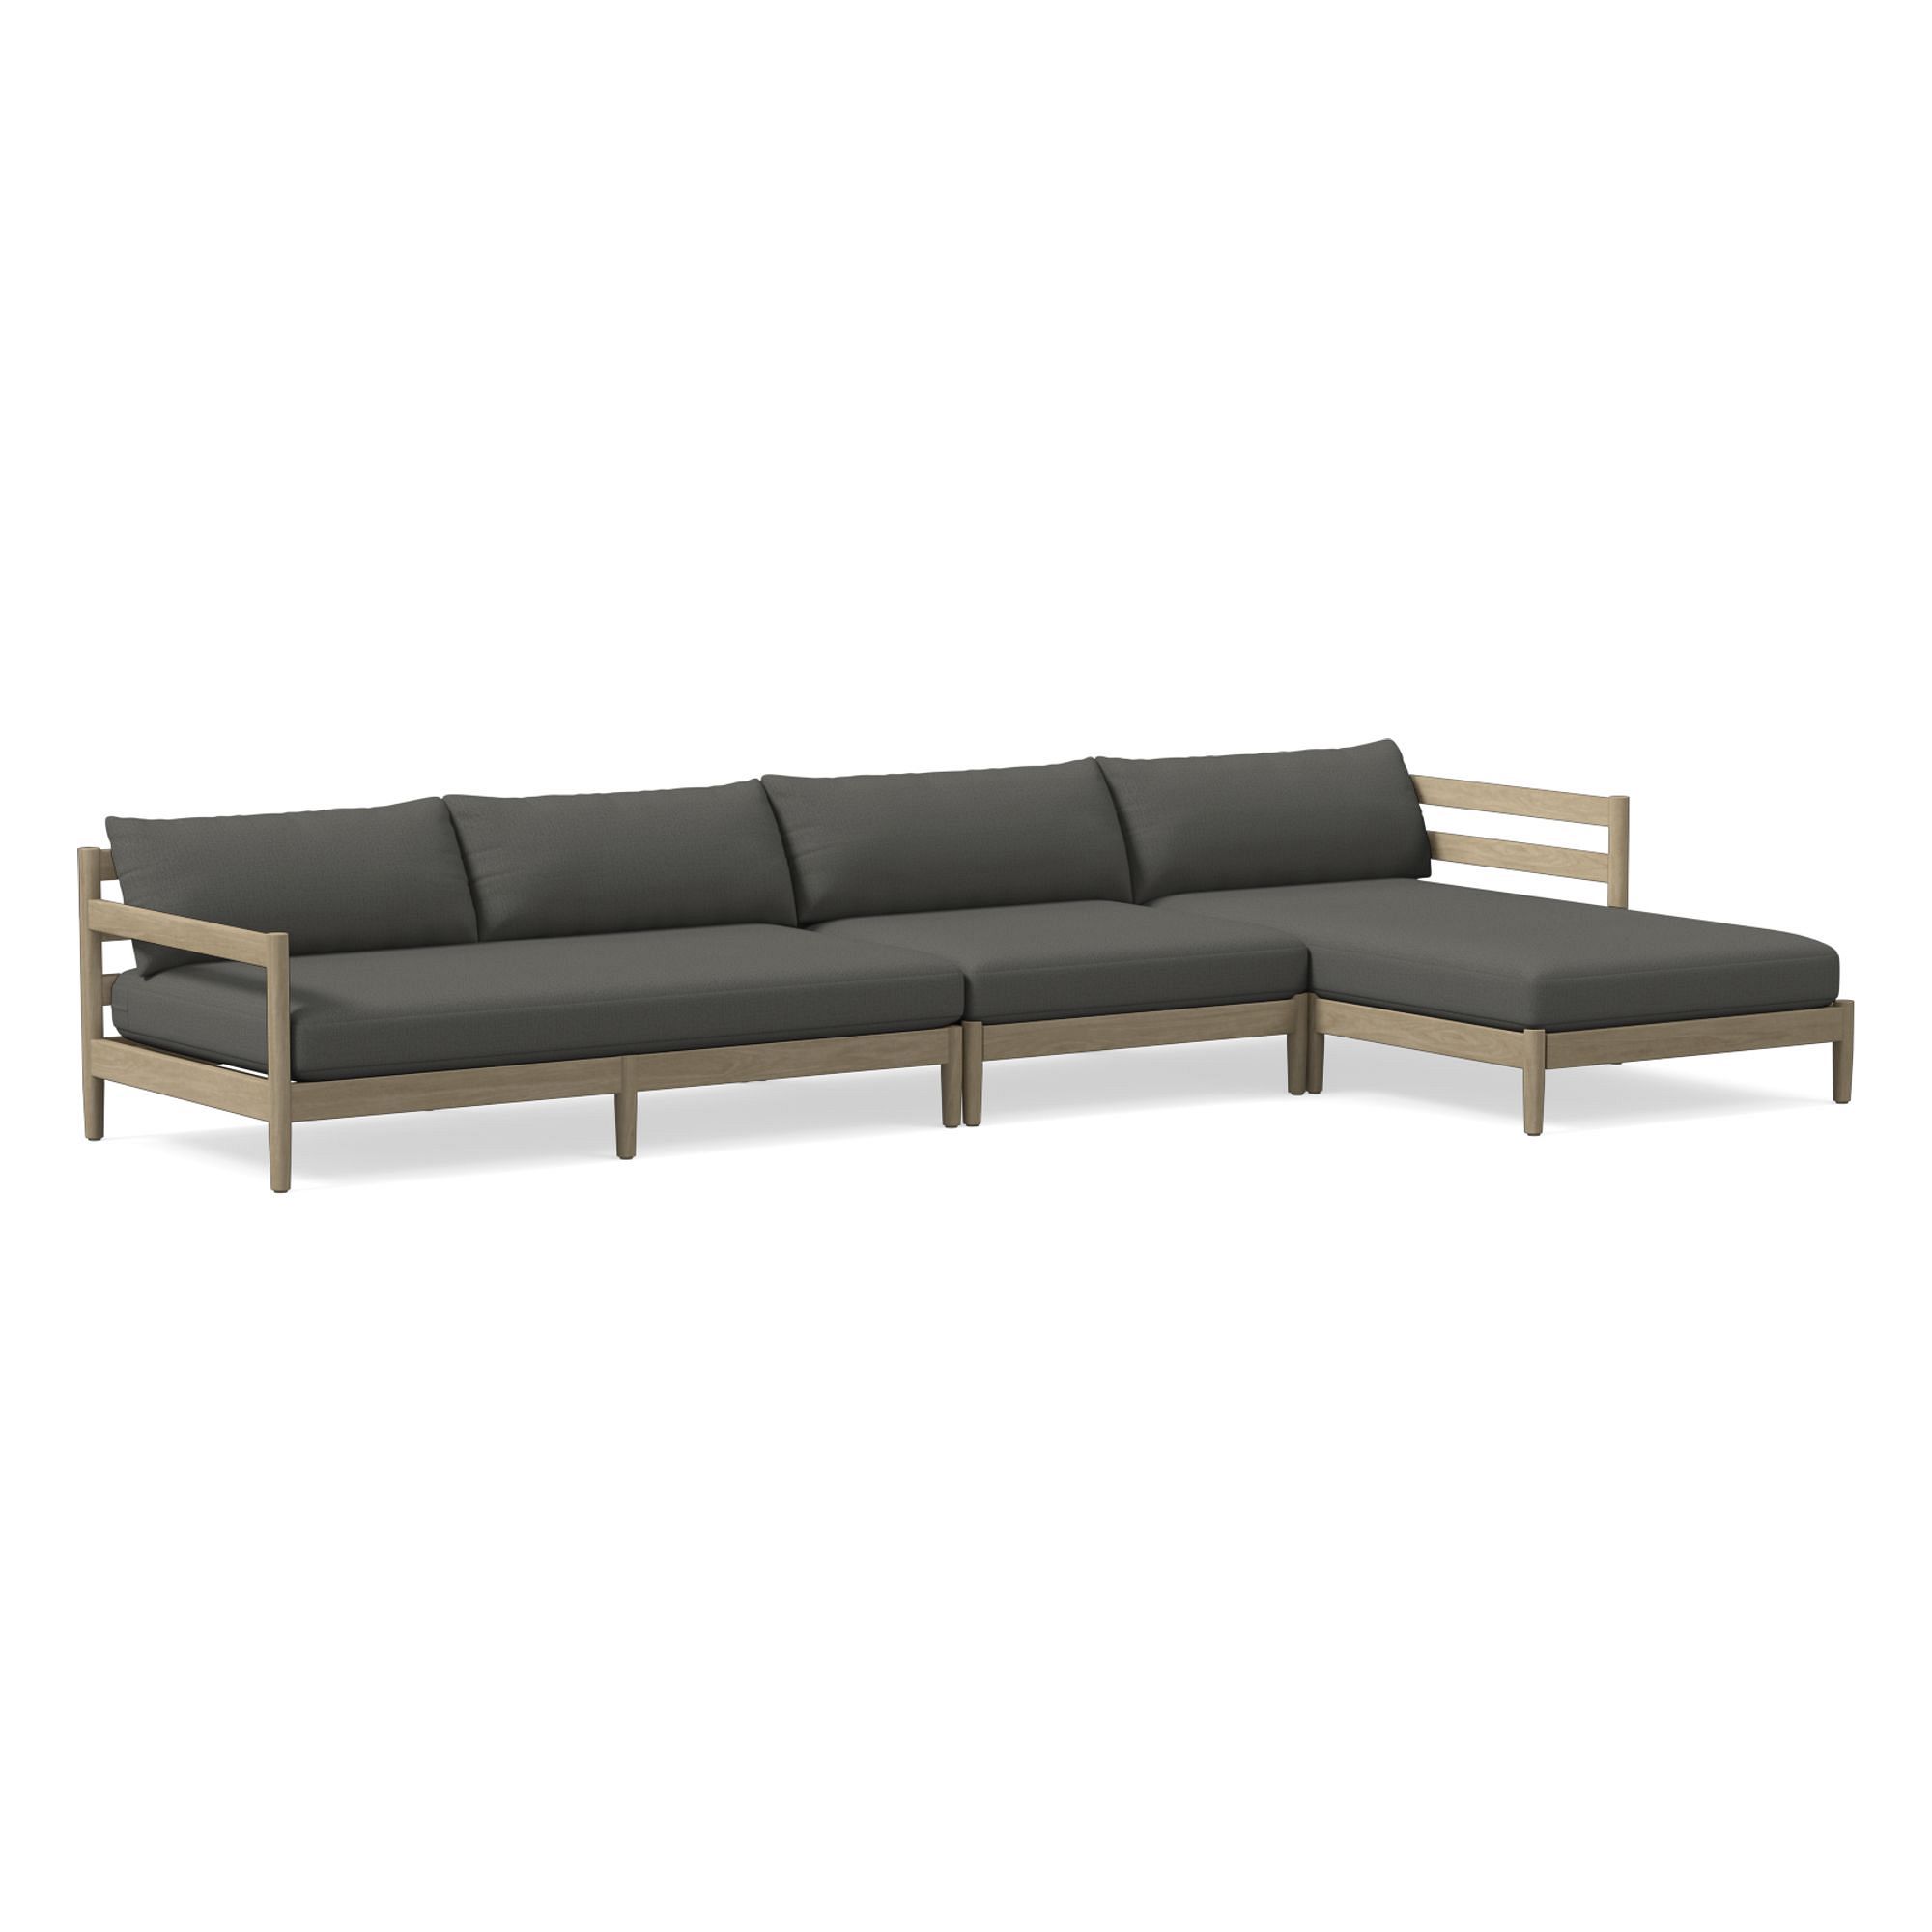 Hargrove Outdoor -Piece Chaise Sectional Cushion Covers | West Elm